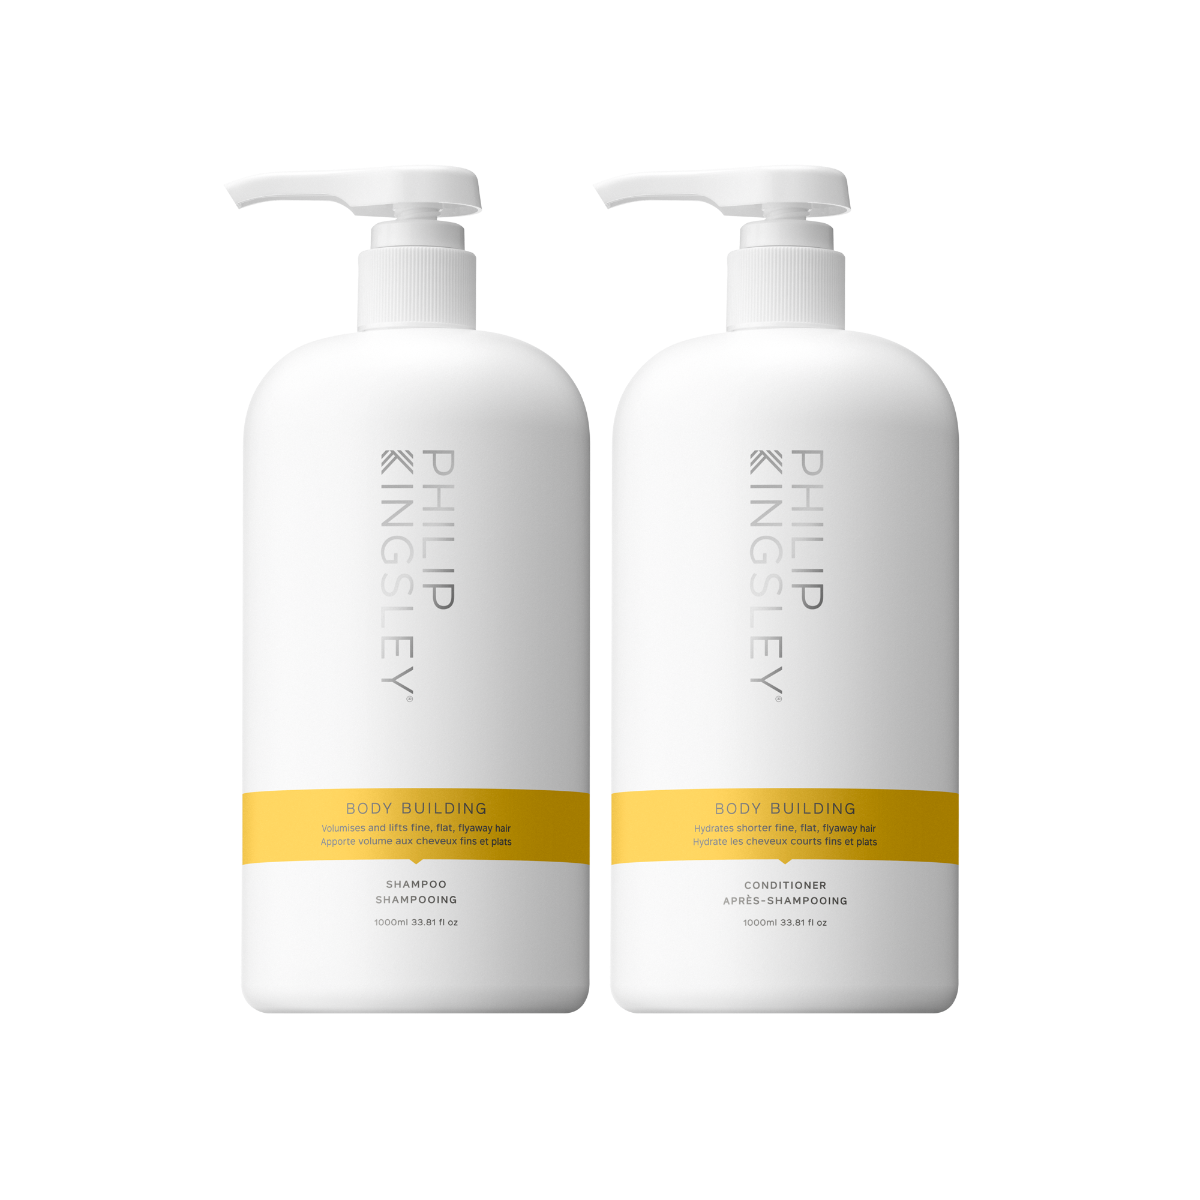 Body Building Weightless Shampoo & Body Building Weightless Conditioner Supersize Duo US